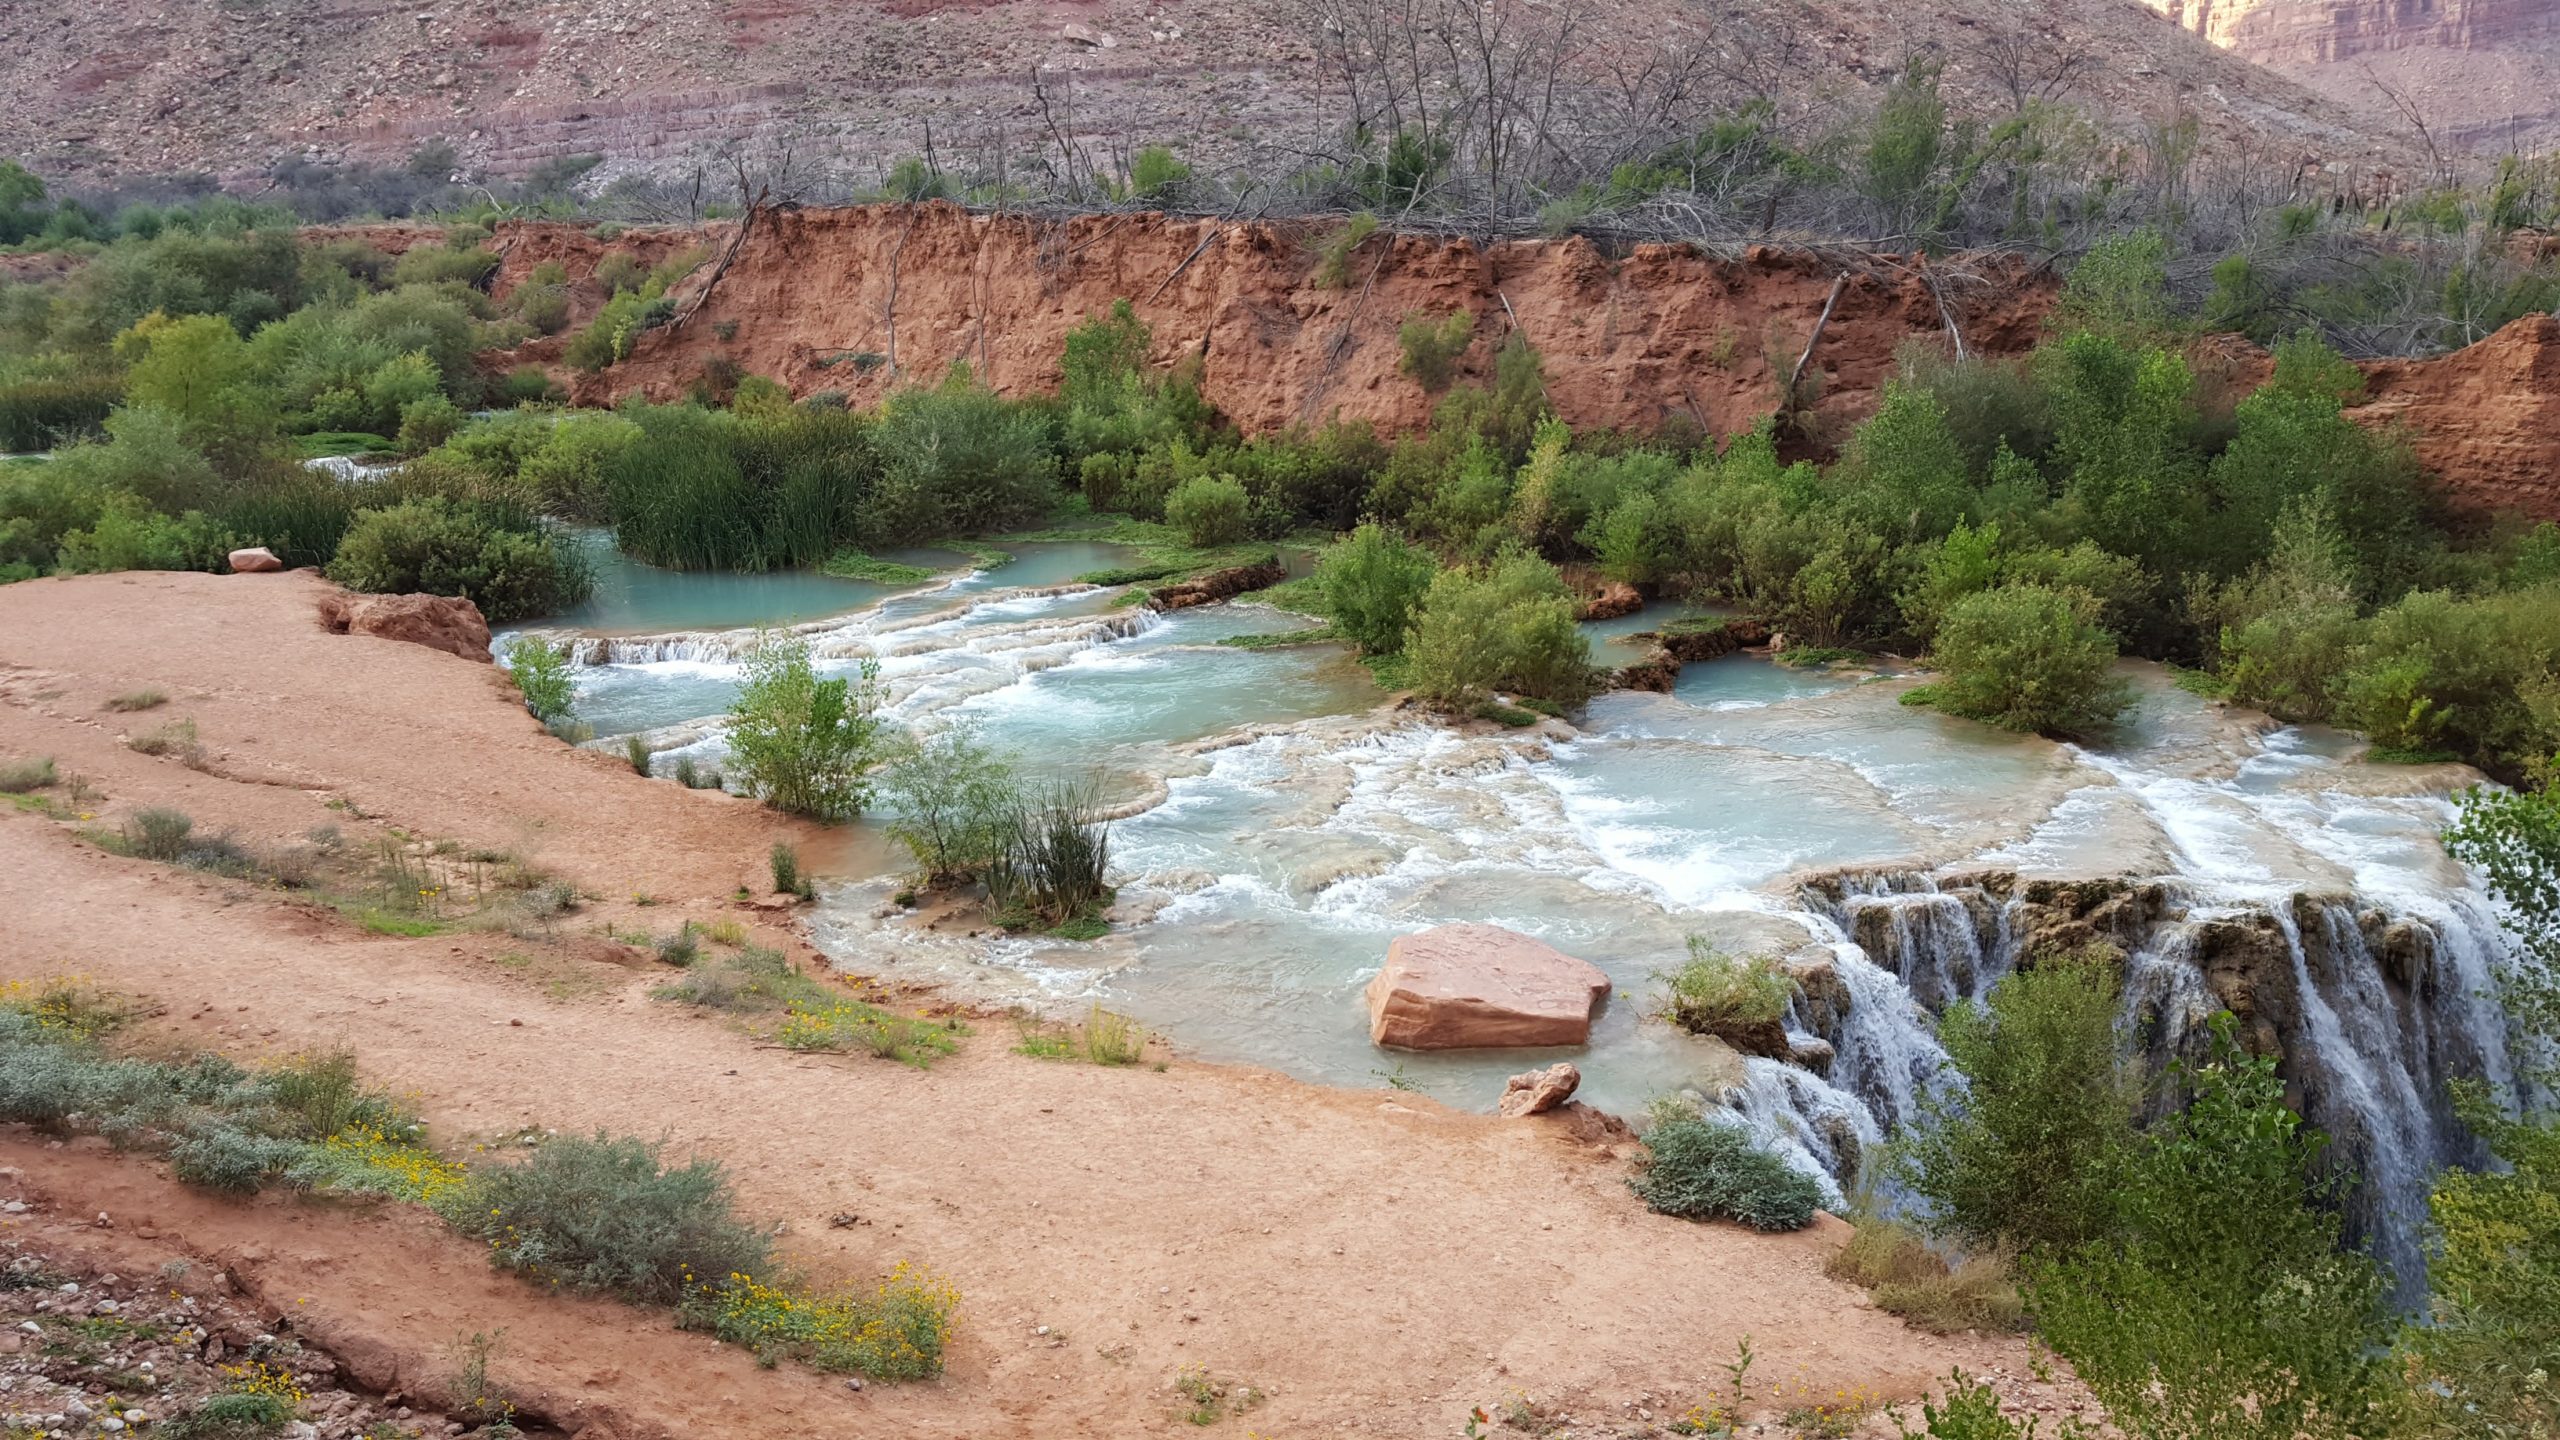 Hike to Havasupai Reservation and Falls